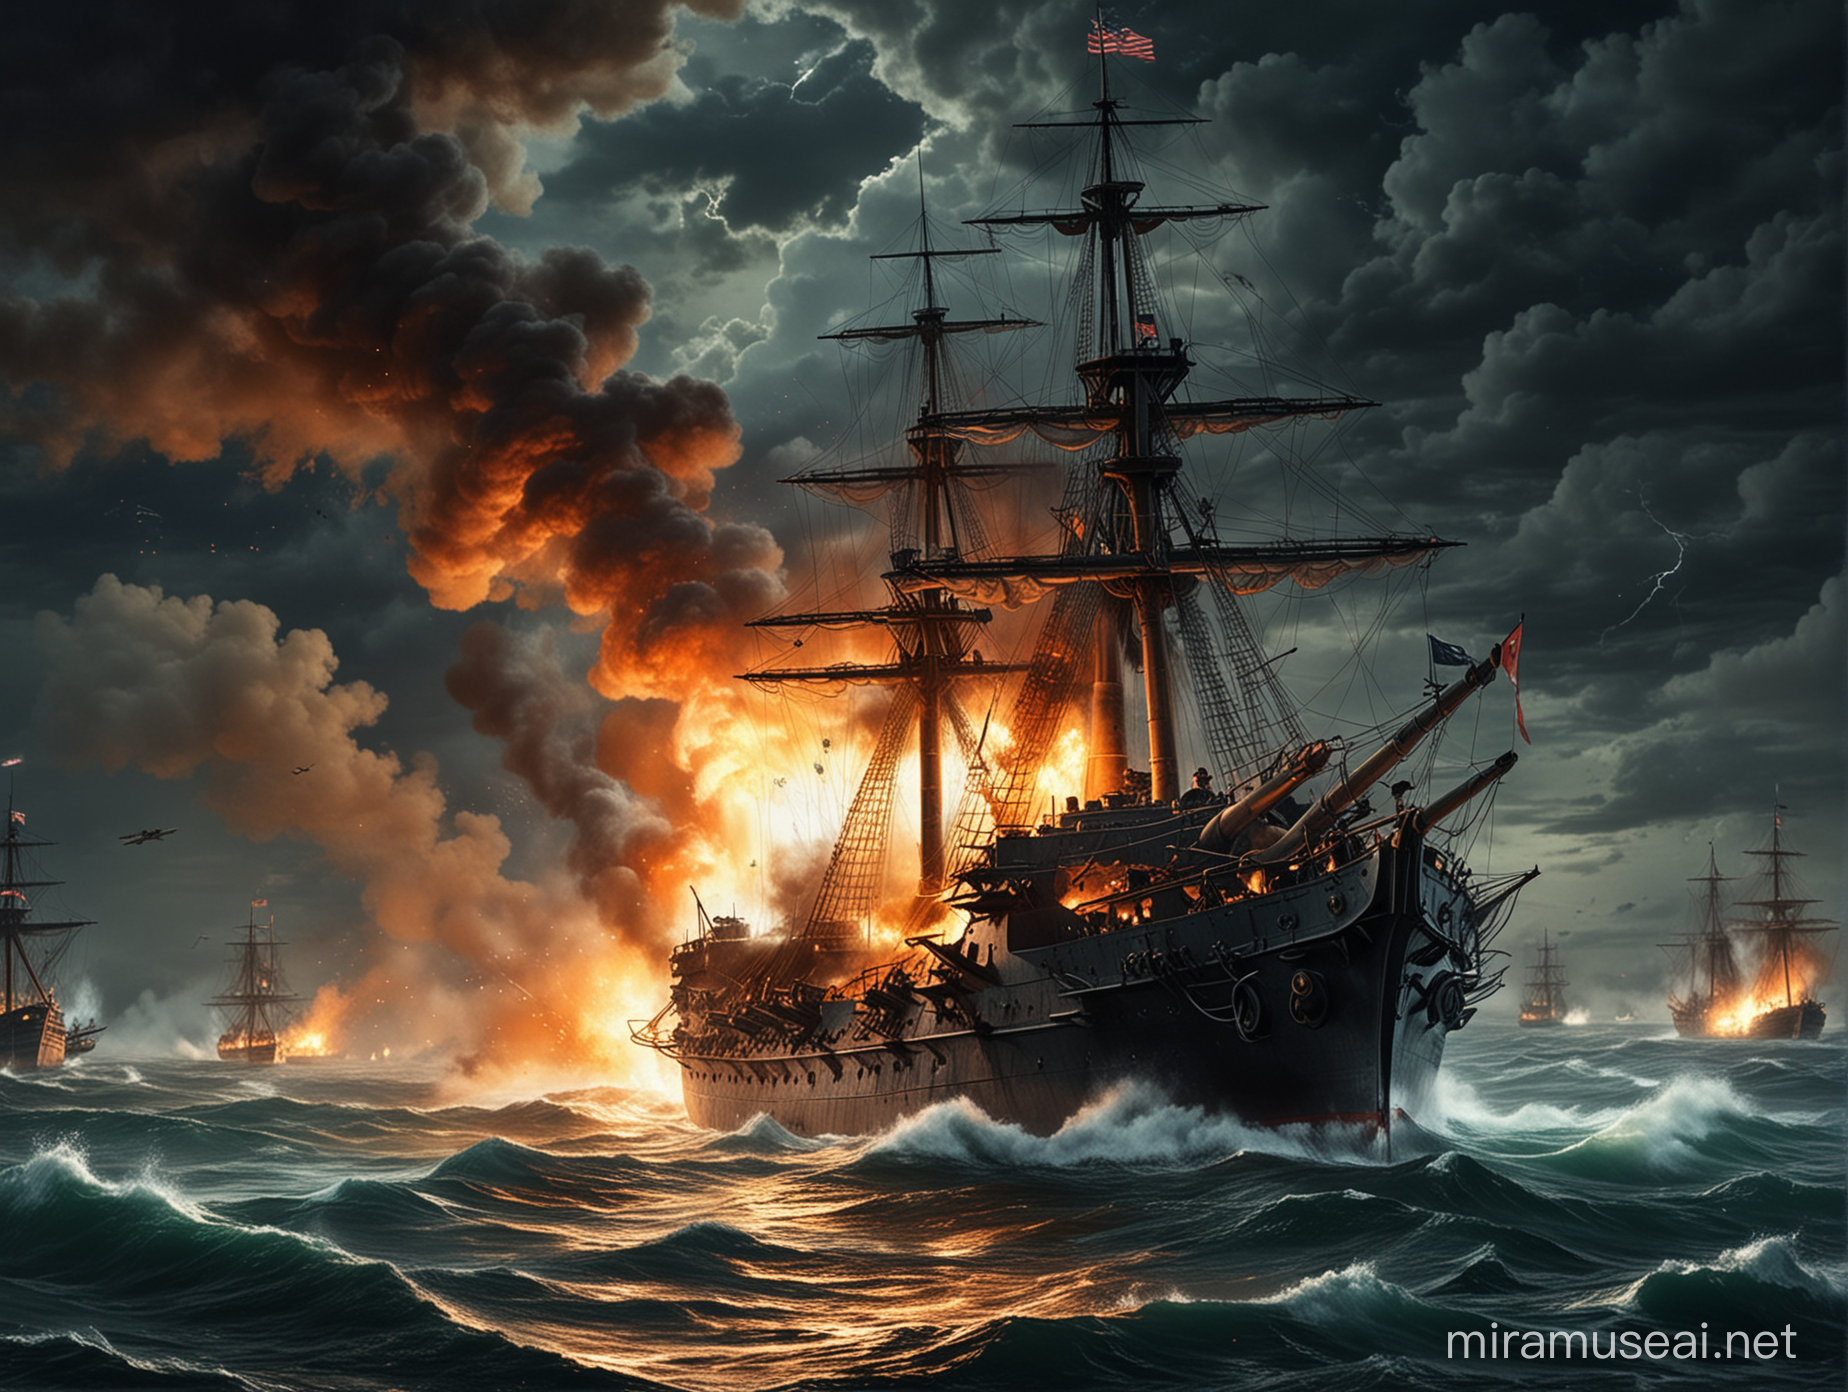 a battleship in war firing cannons and on fire in stormy night